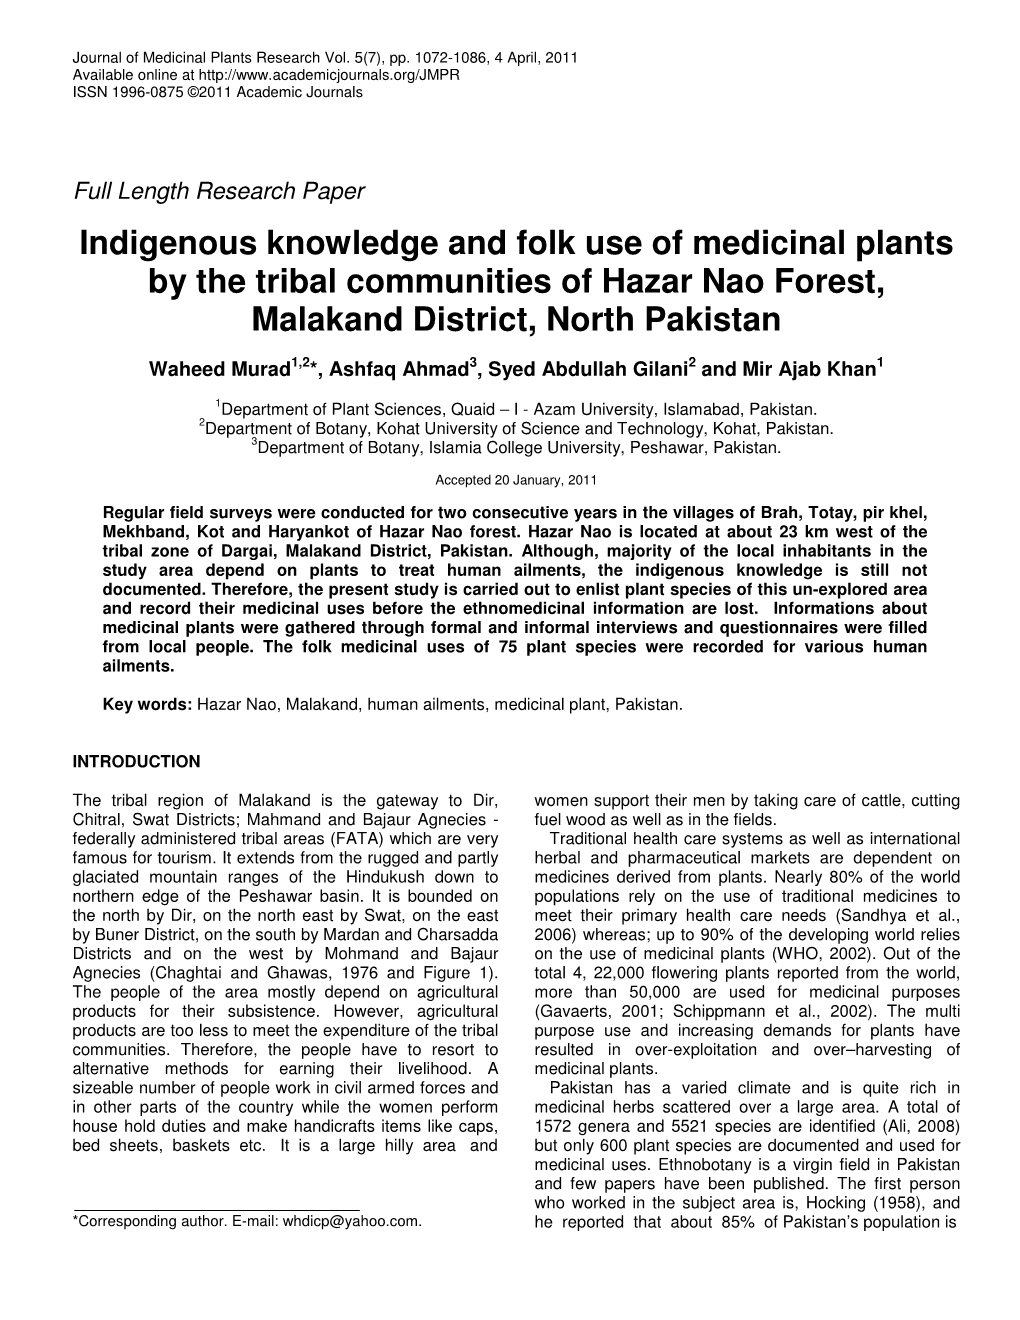 Indigenous Knowledge and Folk Use of Medicinal Plants by the Tribal Communities of Hazar Nao Forest, Malakand District, North Pakistan